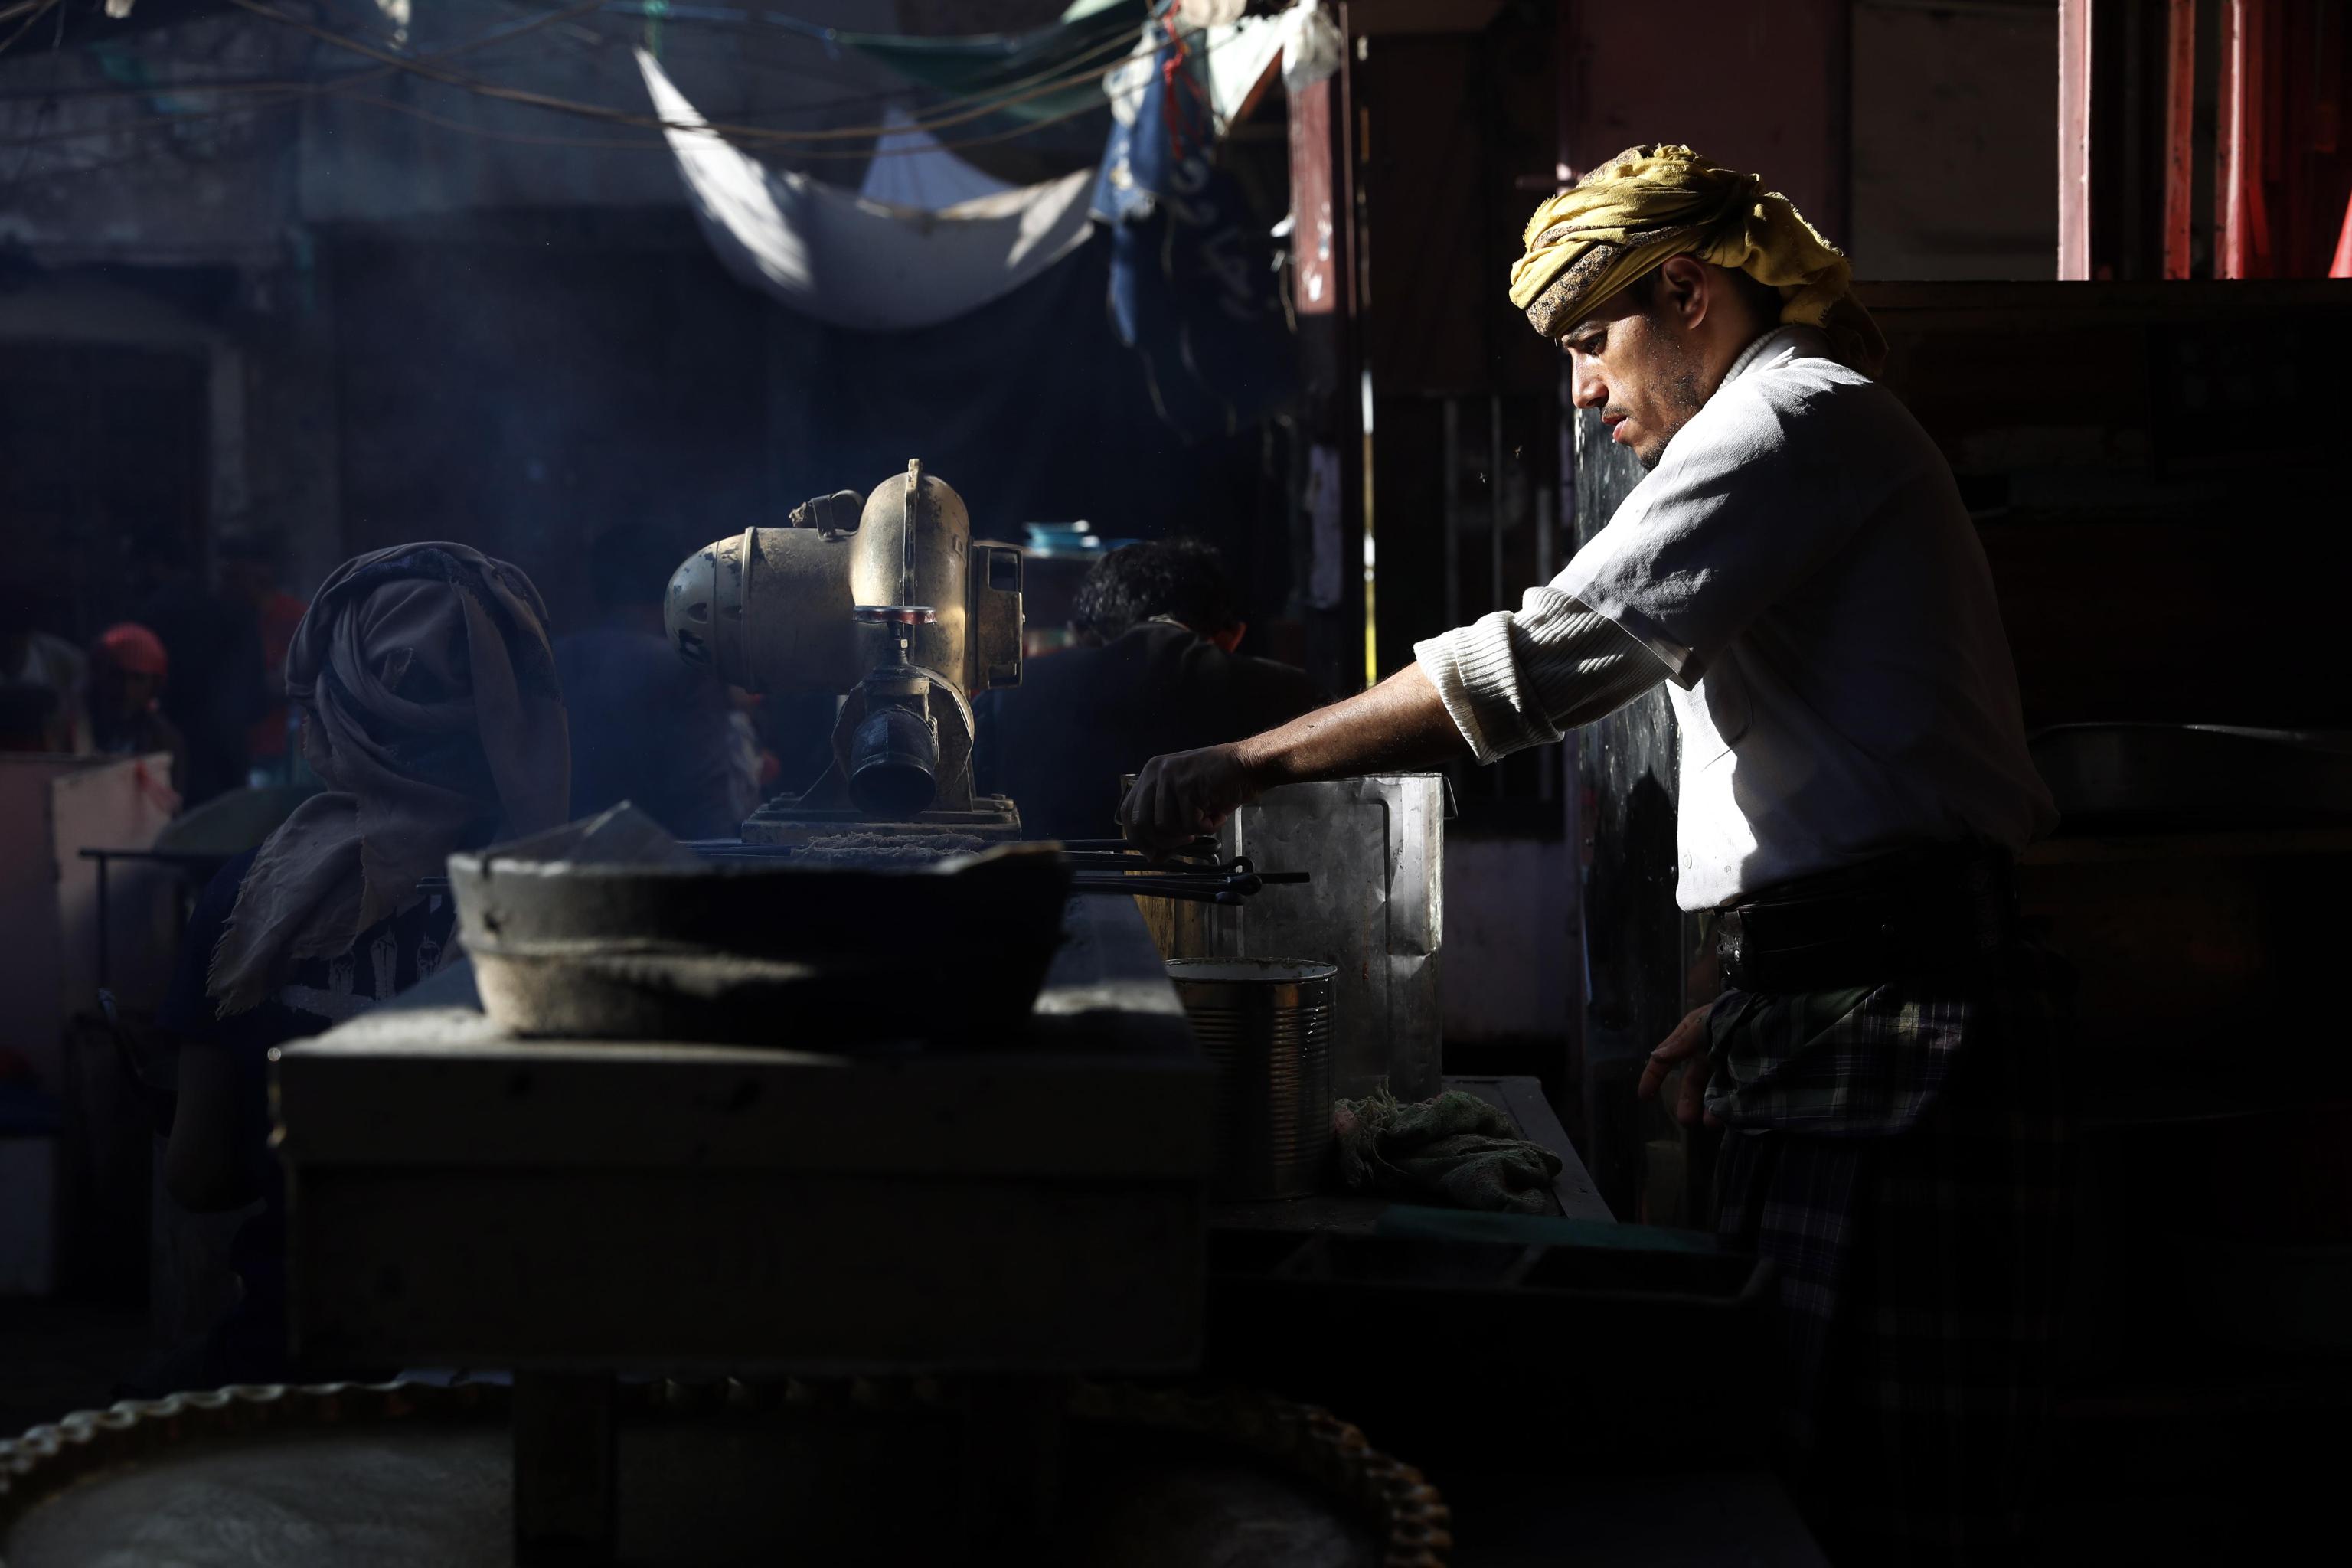 epa07929494 A man prepares kebab for sale at a market in the old quarter of Sanaâa, Yemen, 18 October 2019. Yemen has been in a state of political crisis since the 2011-street protests, culminating in the outbreak of a fighting in March 2015 when the Saudi-led military coalition launched a massive air campaign against the Houthi rebel group, which overran much of the Arab country.  EPA/YAHYA ARHAB